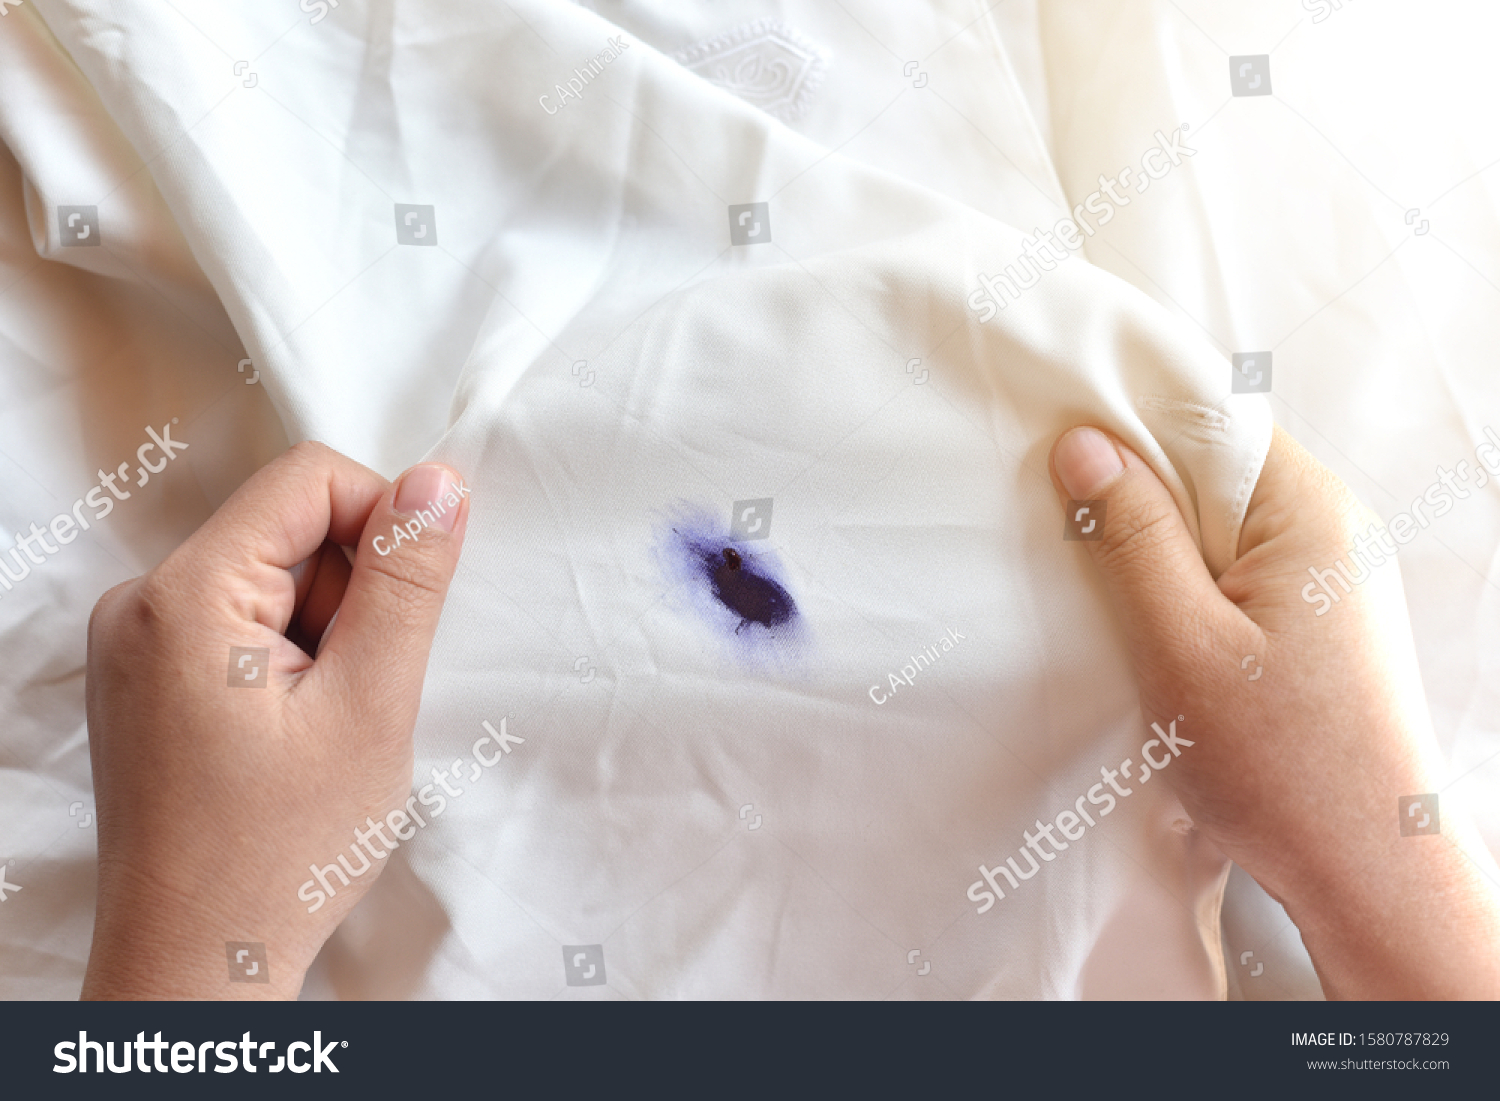 Dirty pen ink  stain on fabric from accident in daily life. Concept of cleaning stains on clothes or cleaning the house. Selected focus #1580787829